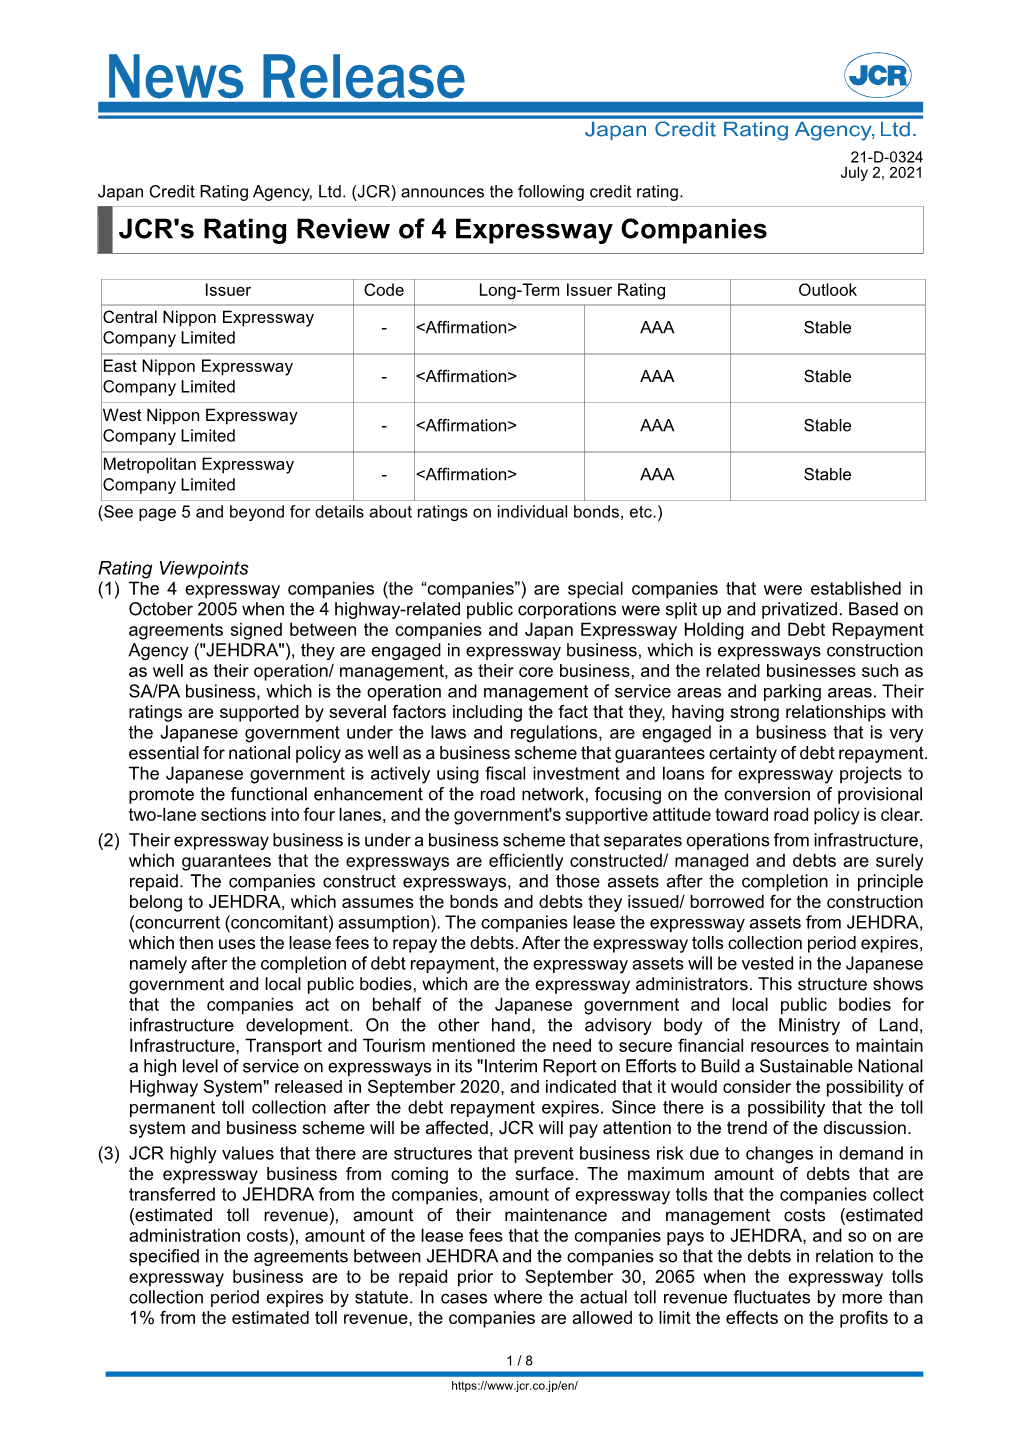 JCR's Rating Review of 4 Expressway Companies